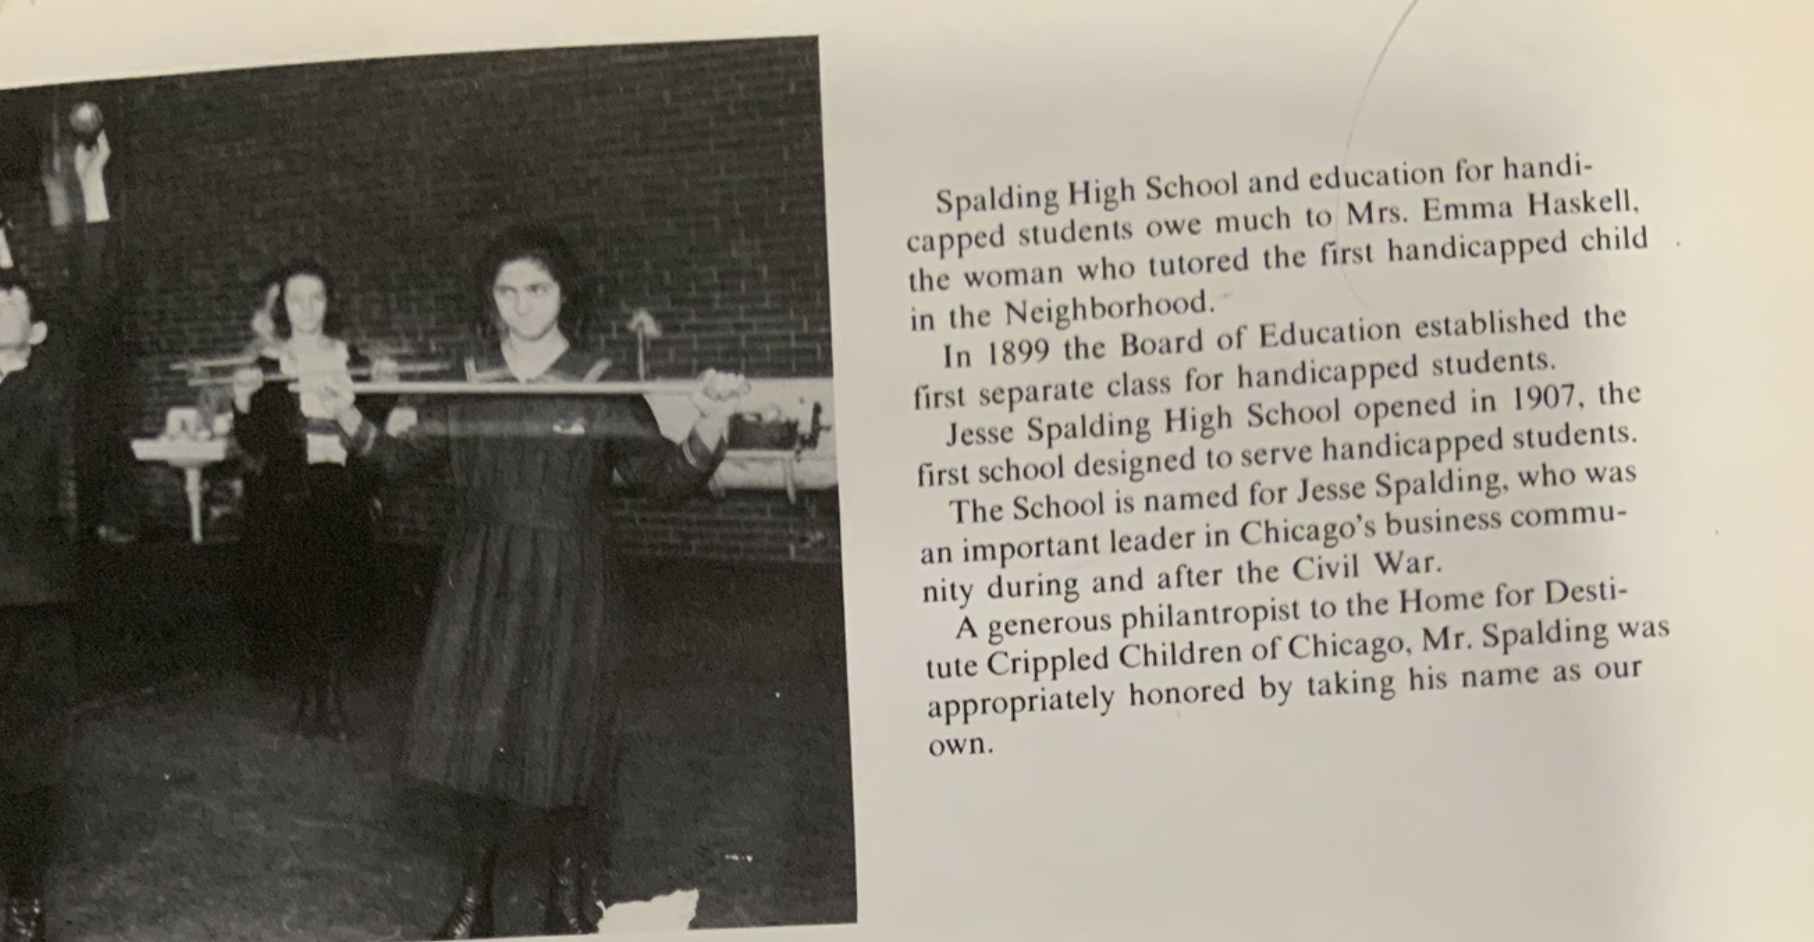 a girl holds an exercise bar in front of her.The text nexts to her reads in part: spalding high school and education for handicapped students owe much to emma haskell, the woman who tutored the first handicapped child in the neighborhood.